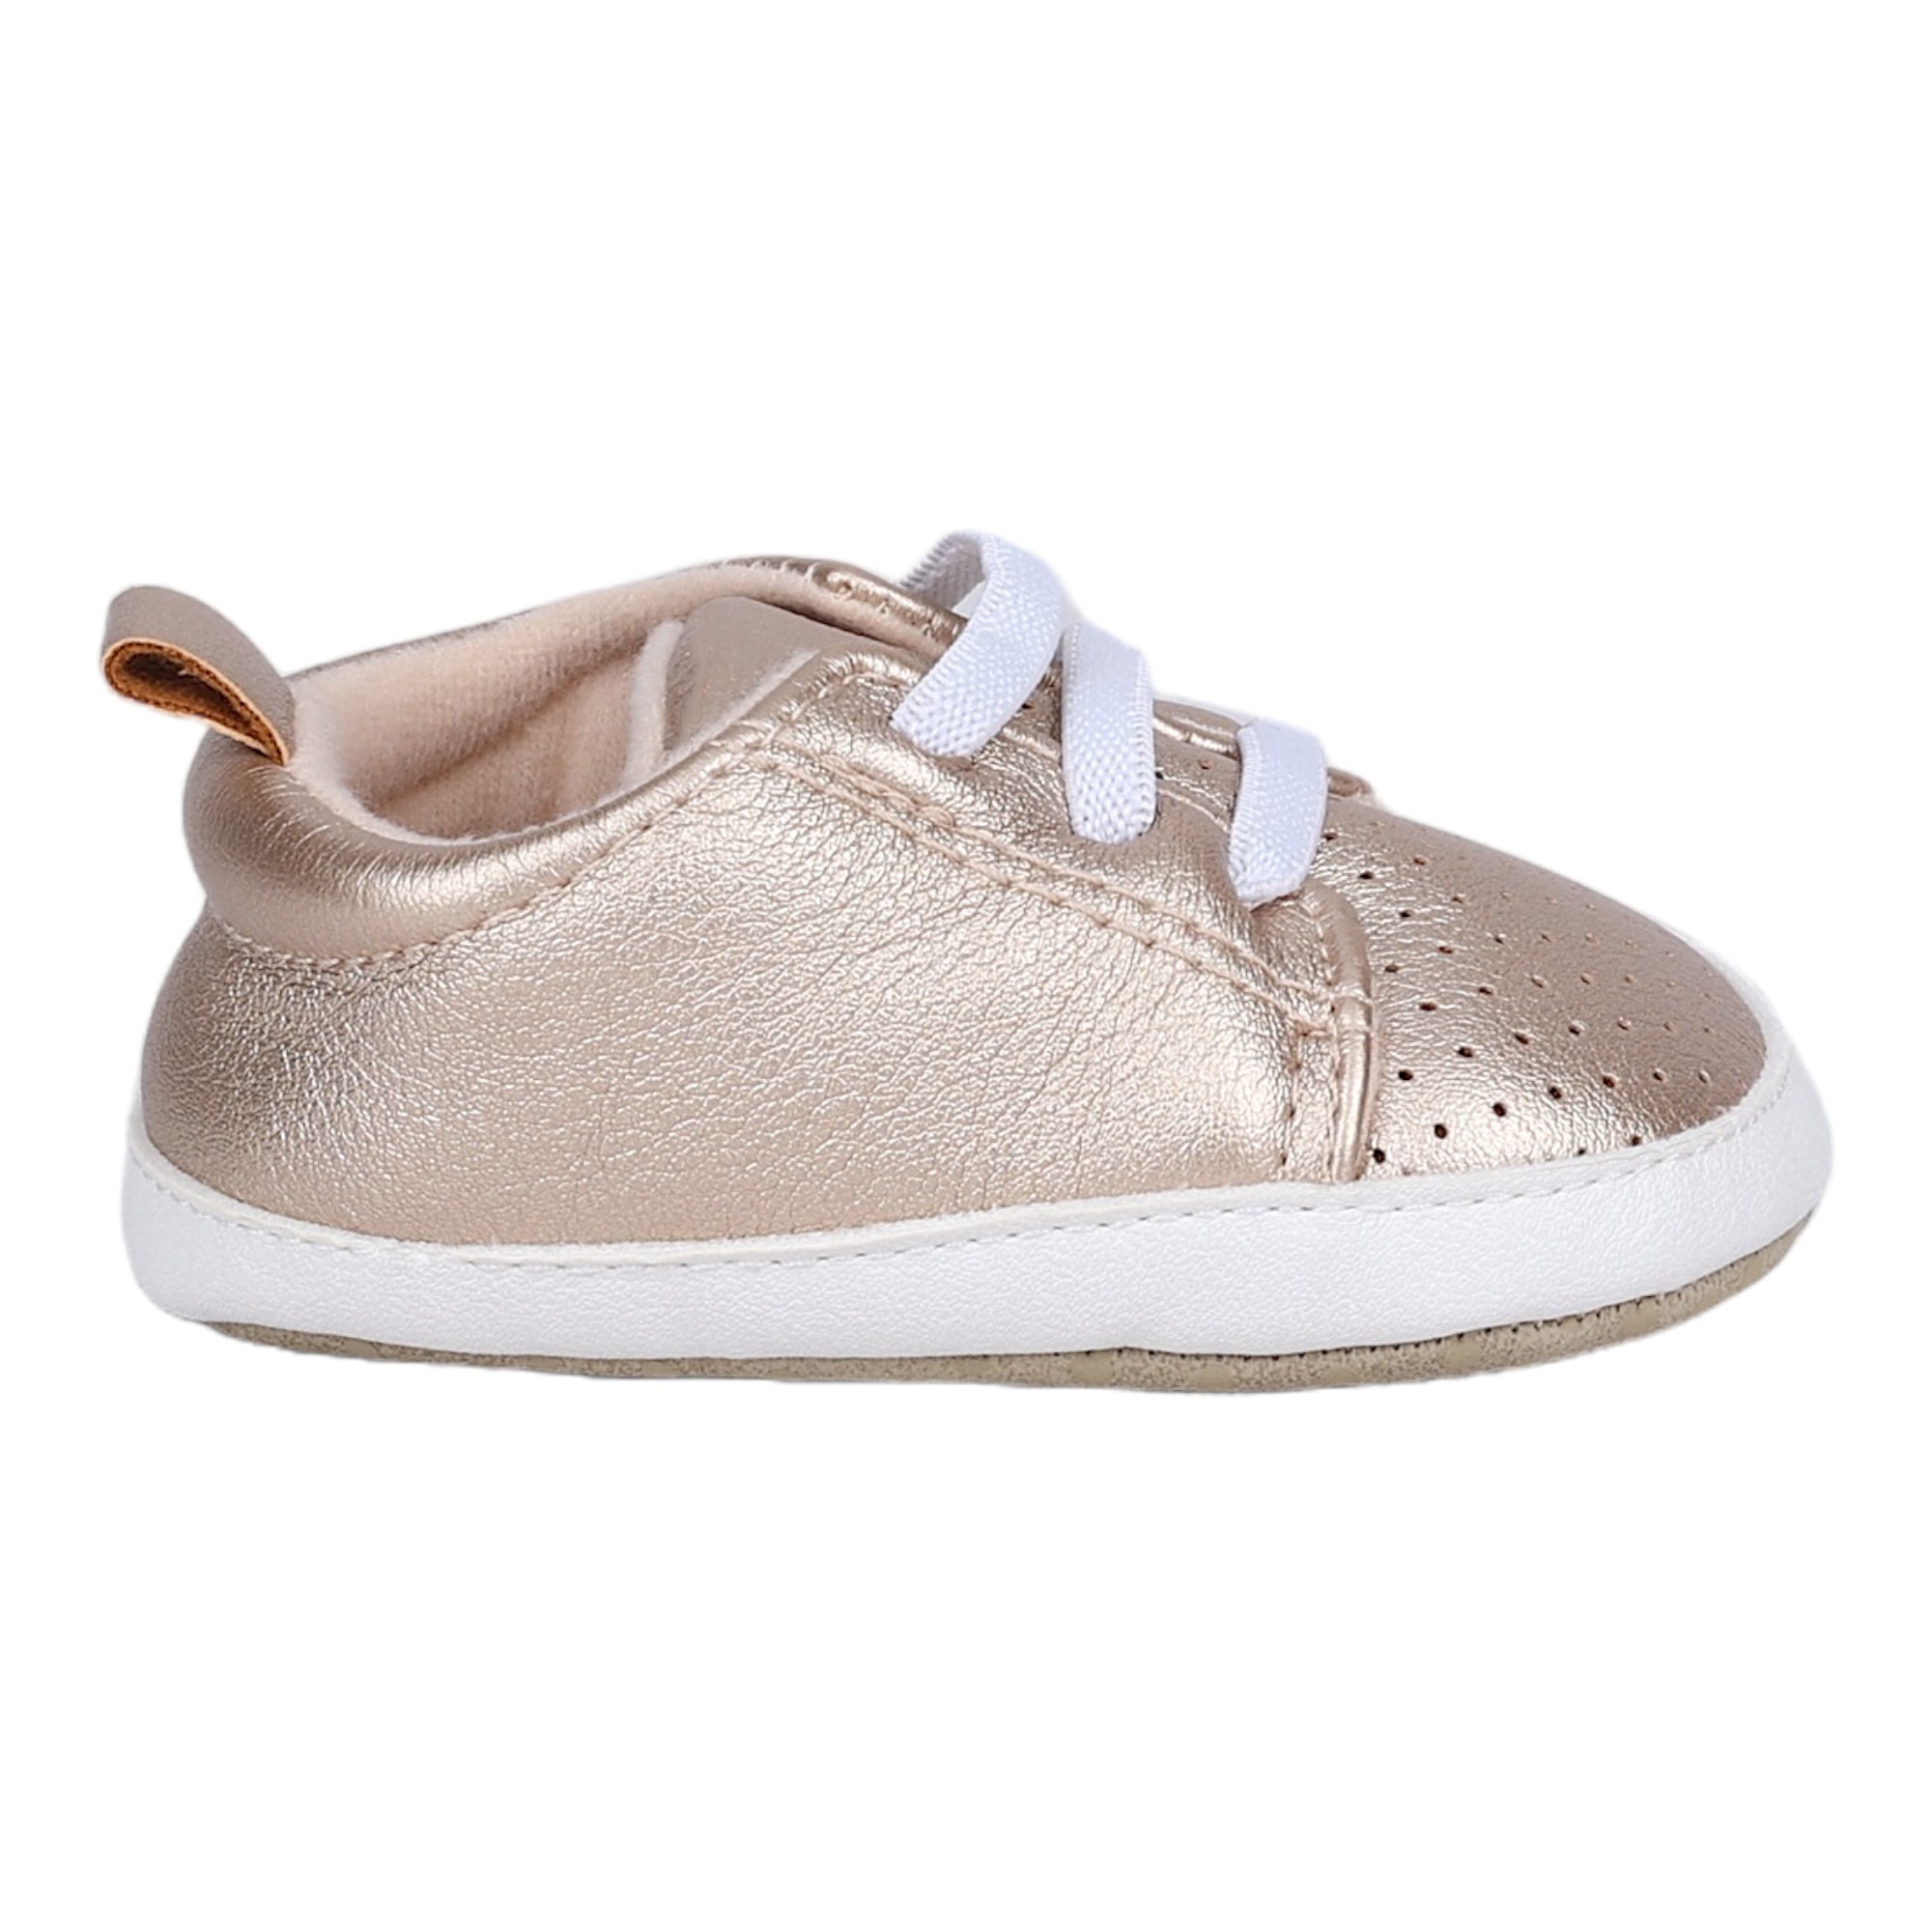 Baby Moo Dotted Breathable Lace-Up Design Anti-Skid Vegan Leather Sneakers - Gold